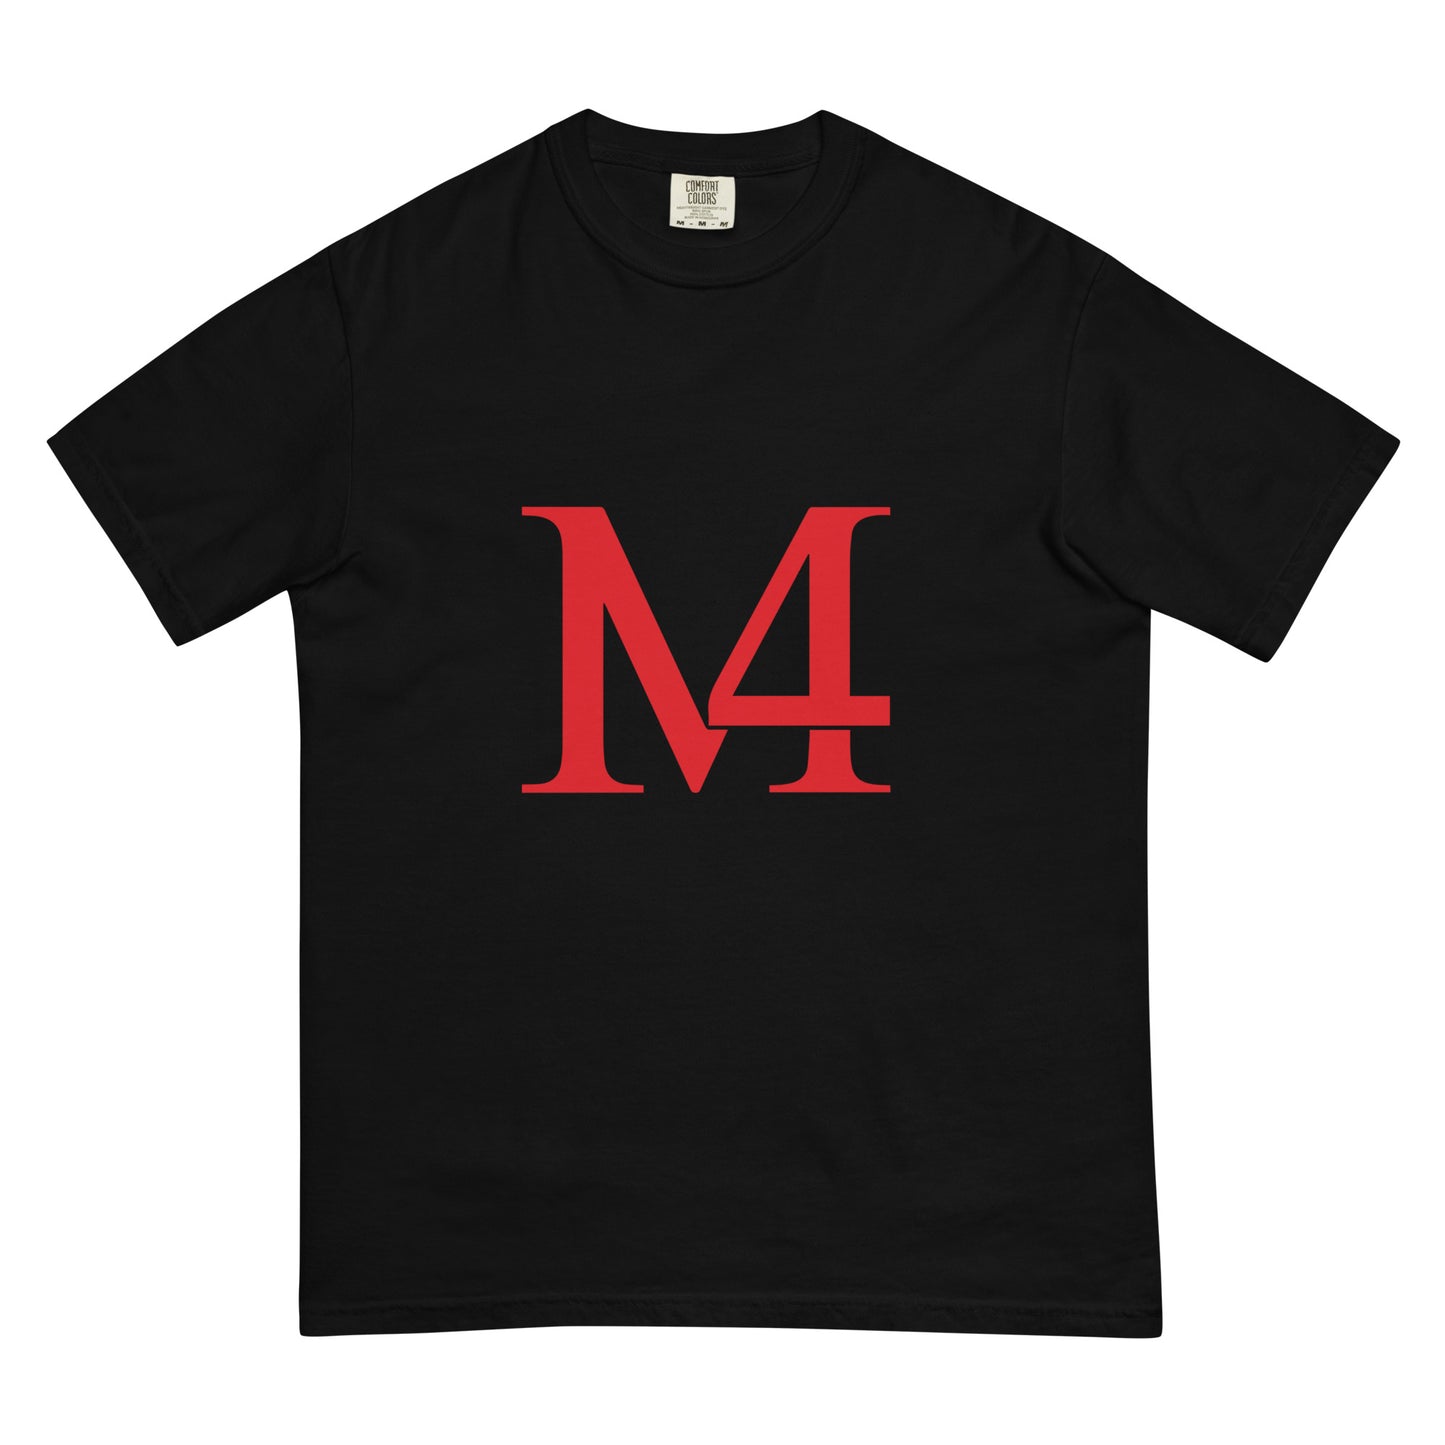 Black and Red Men’s garment-dyed heavyweight t-shirt